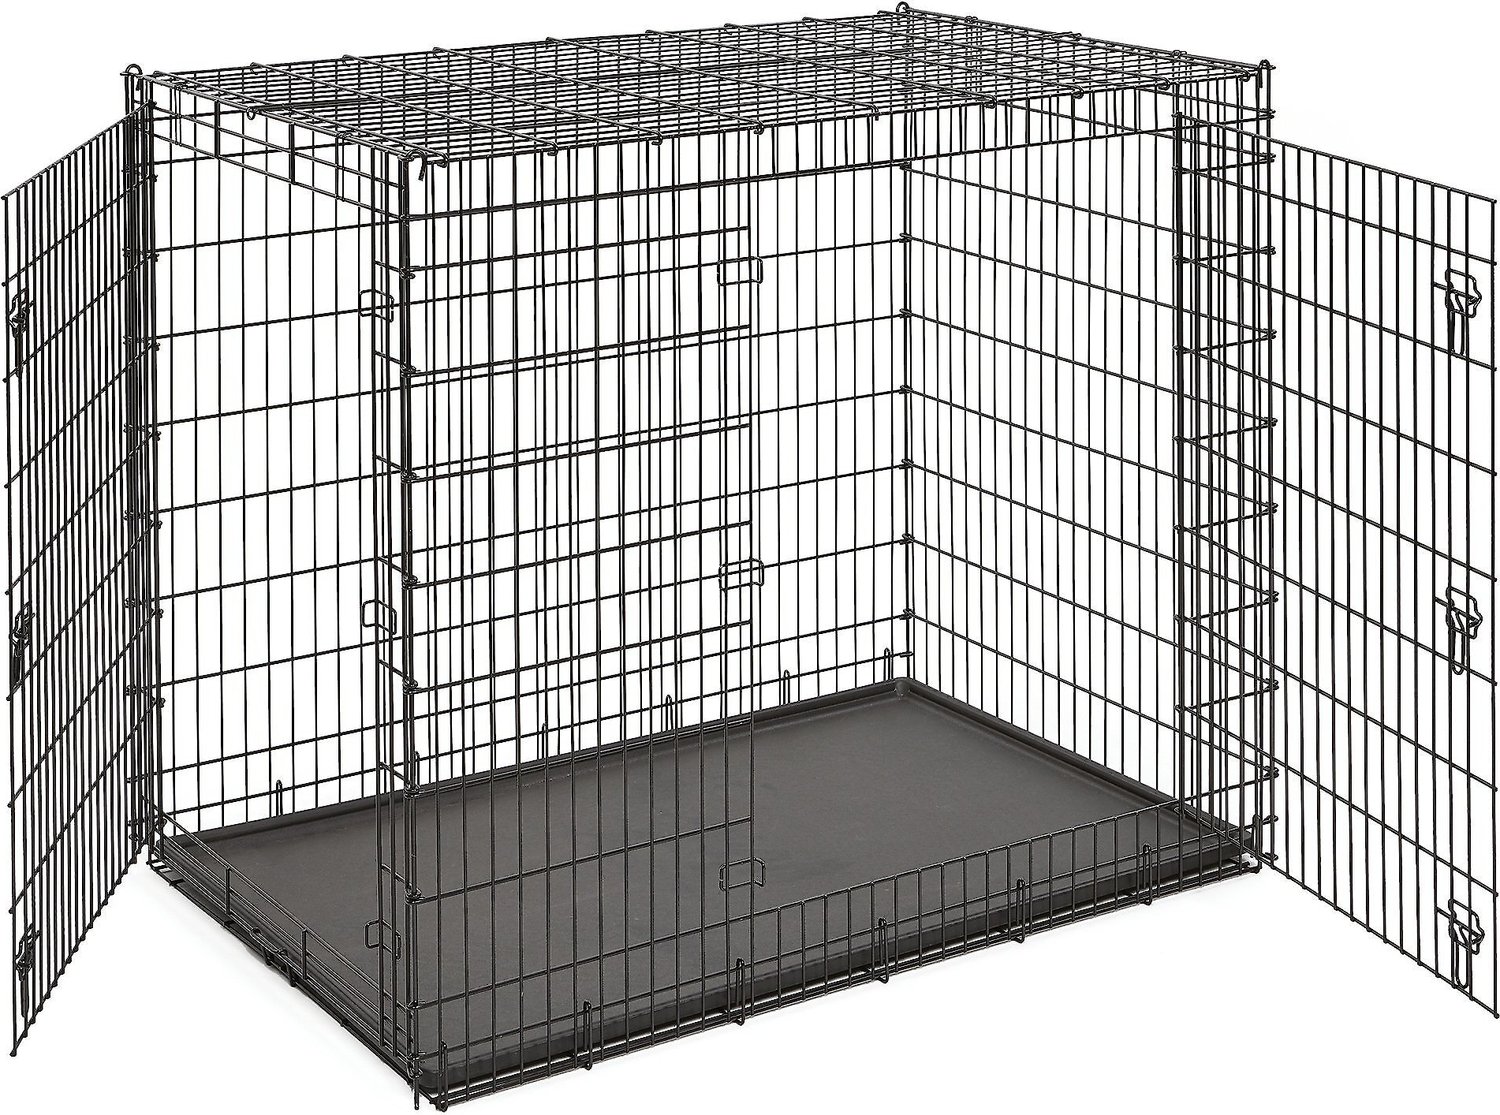 Midwest Solution Series Ginormous Double Door Dog Crate